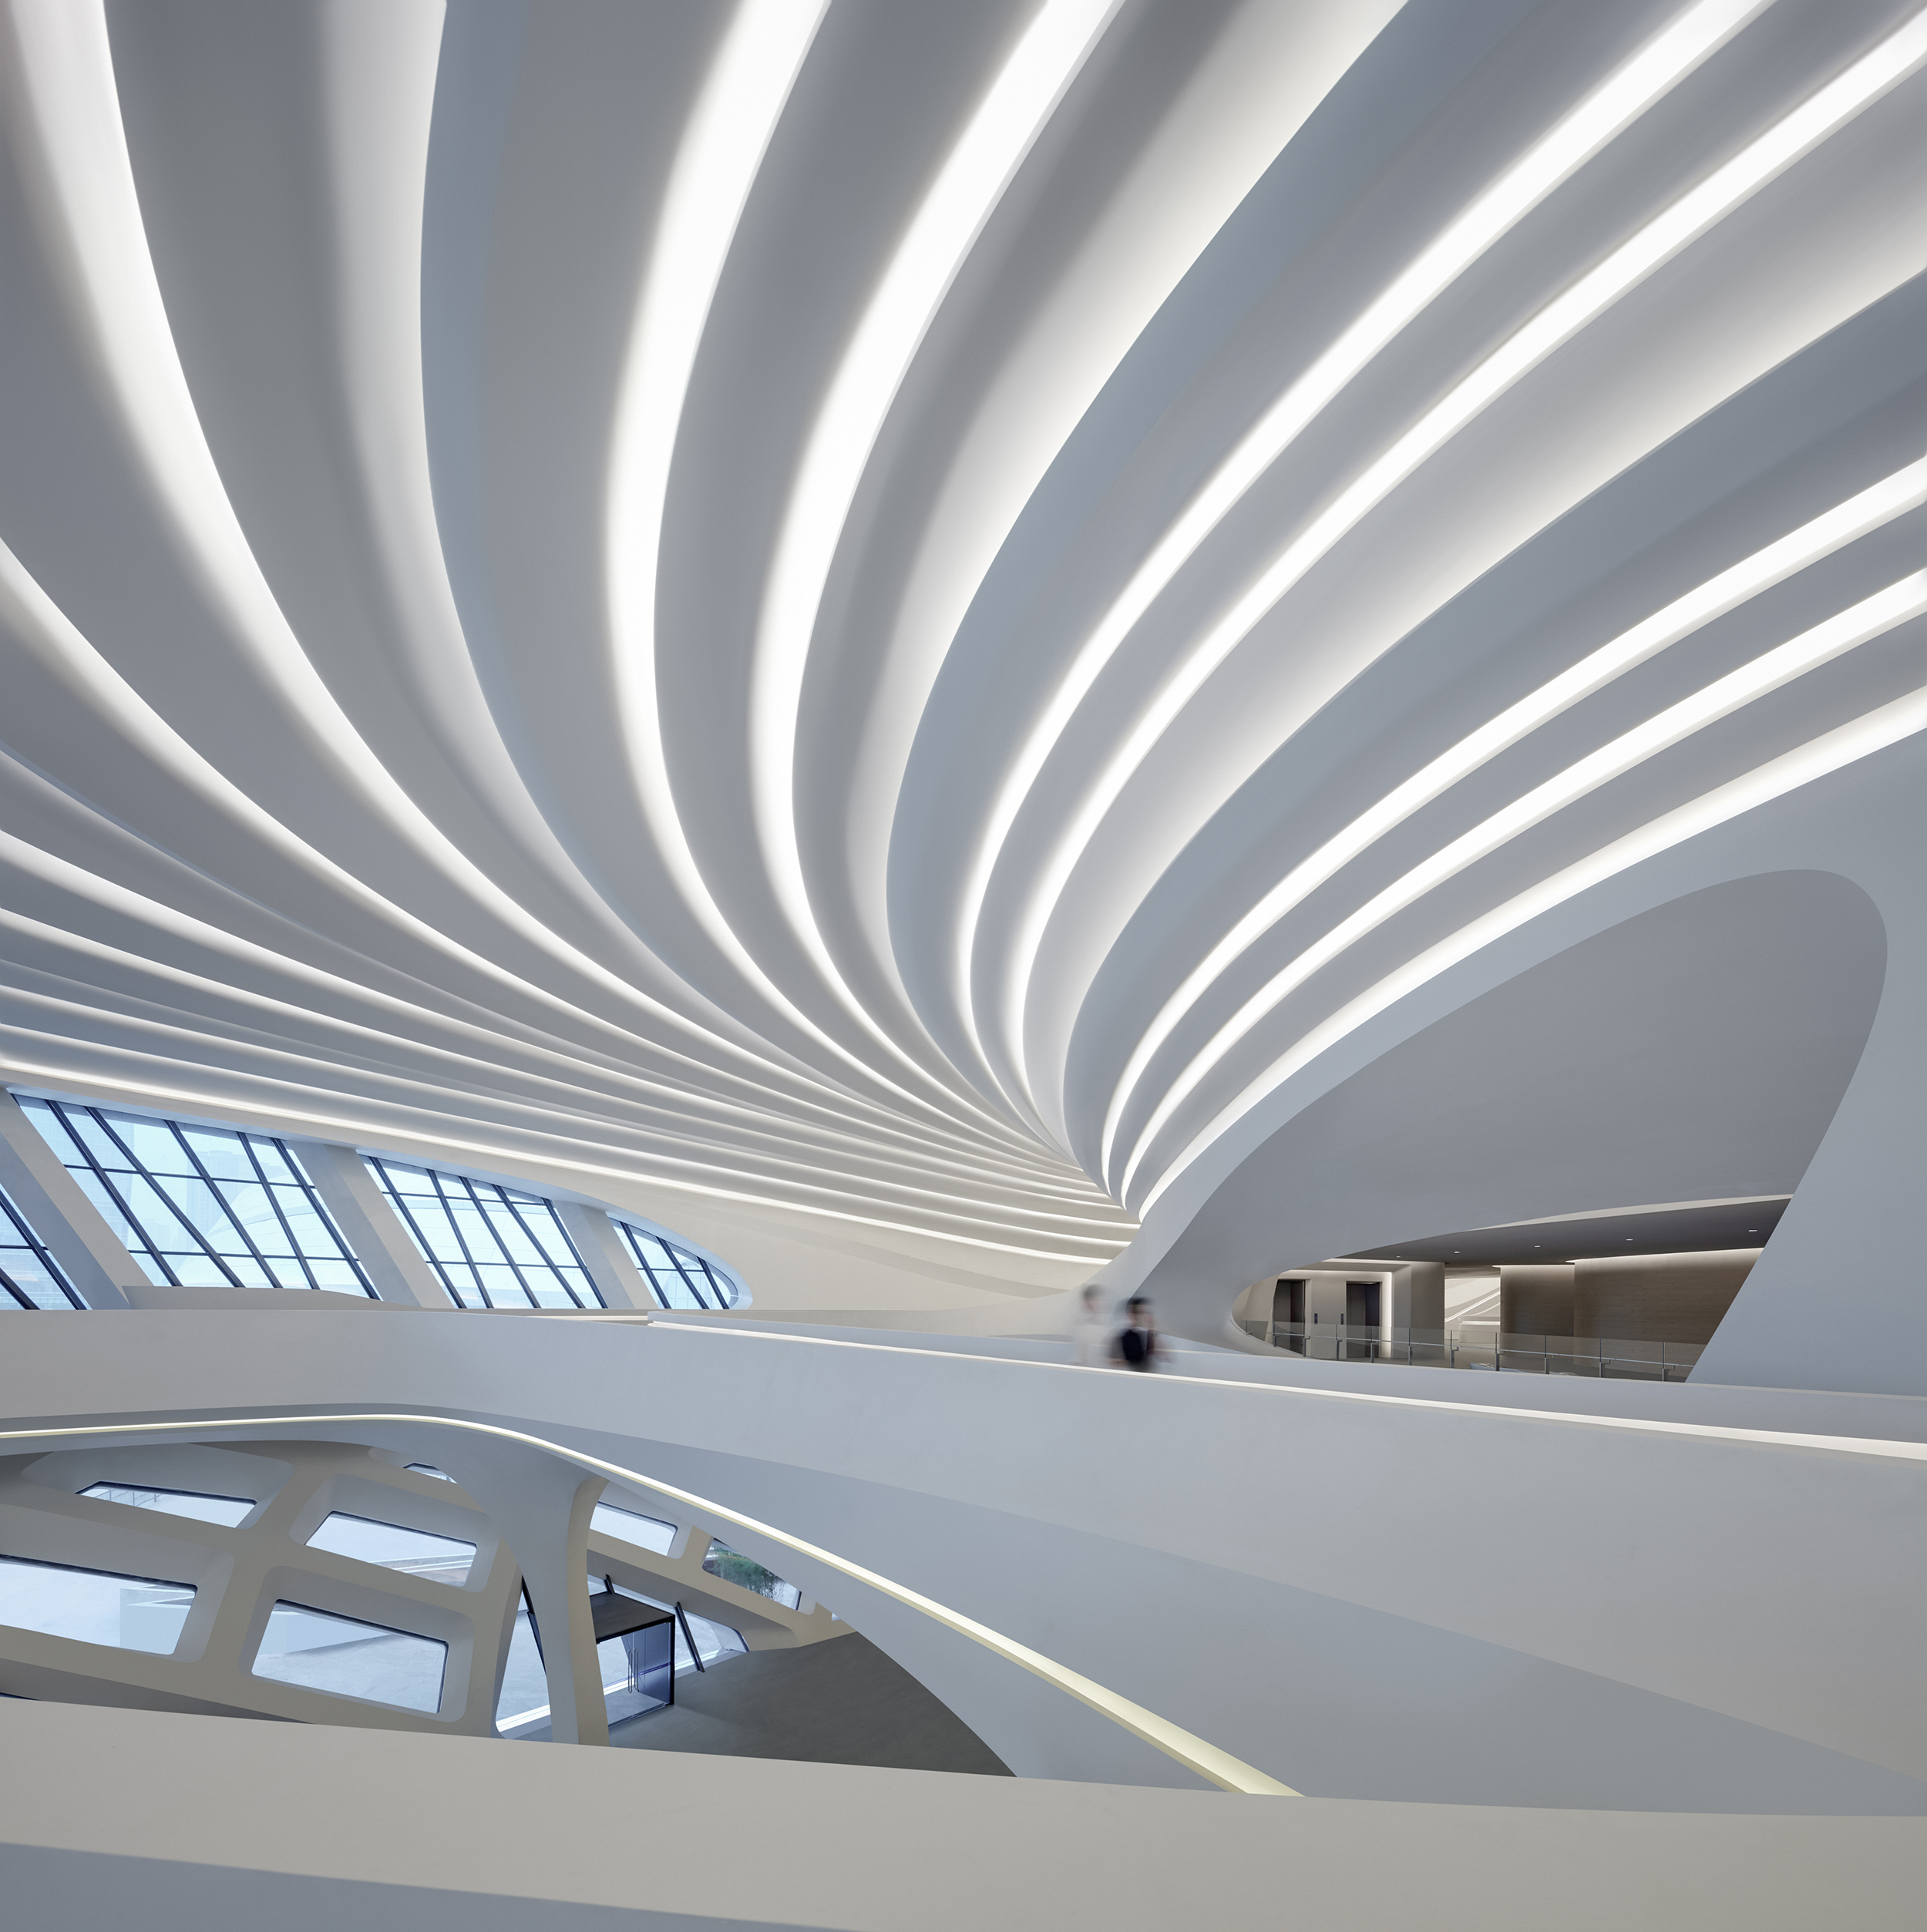 New China cultural Center by Zaha Hadid Architects - The Changsha Meixihu International Culture and Art Center